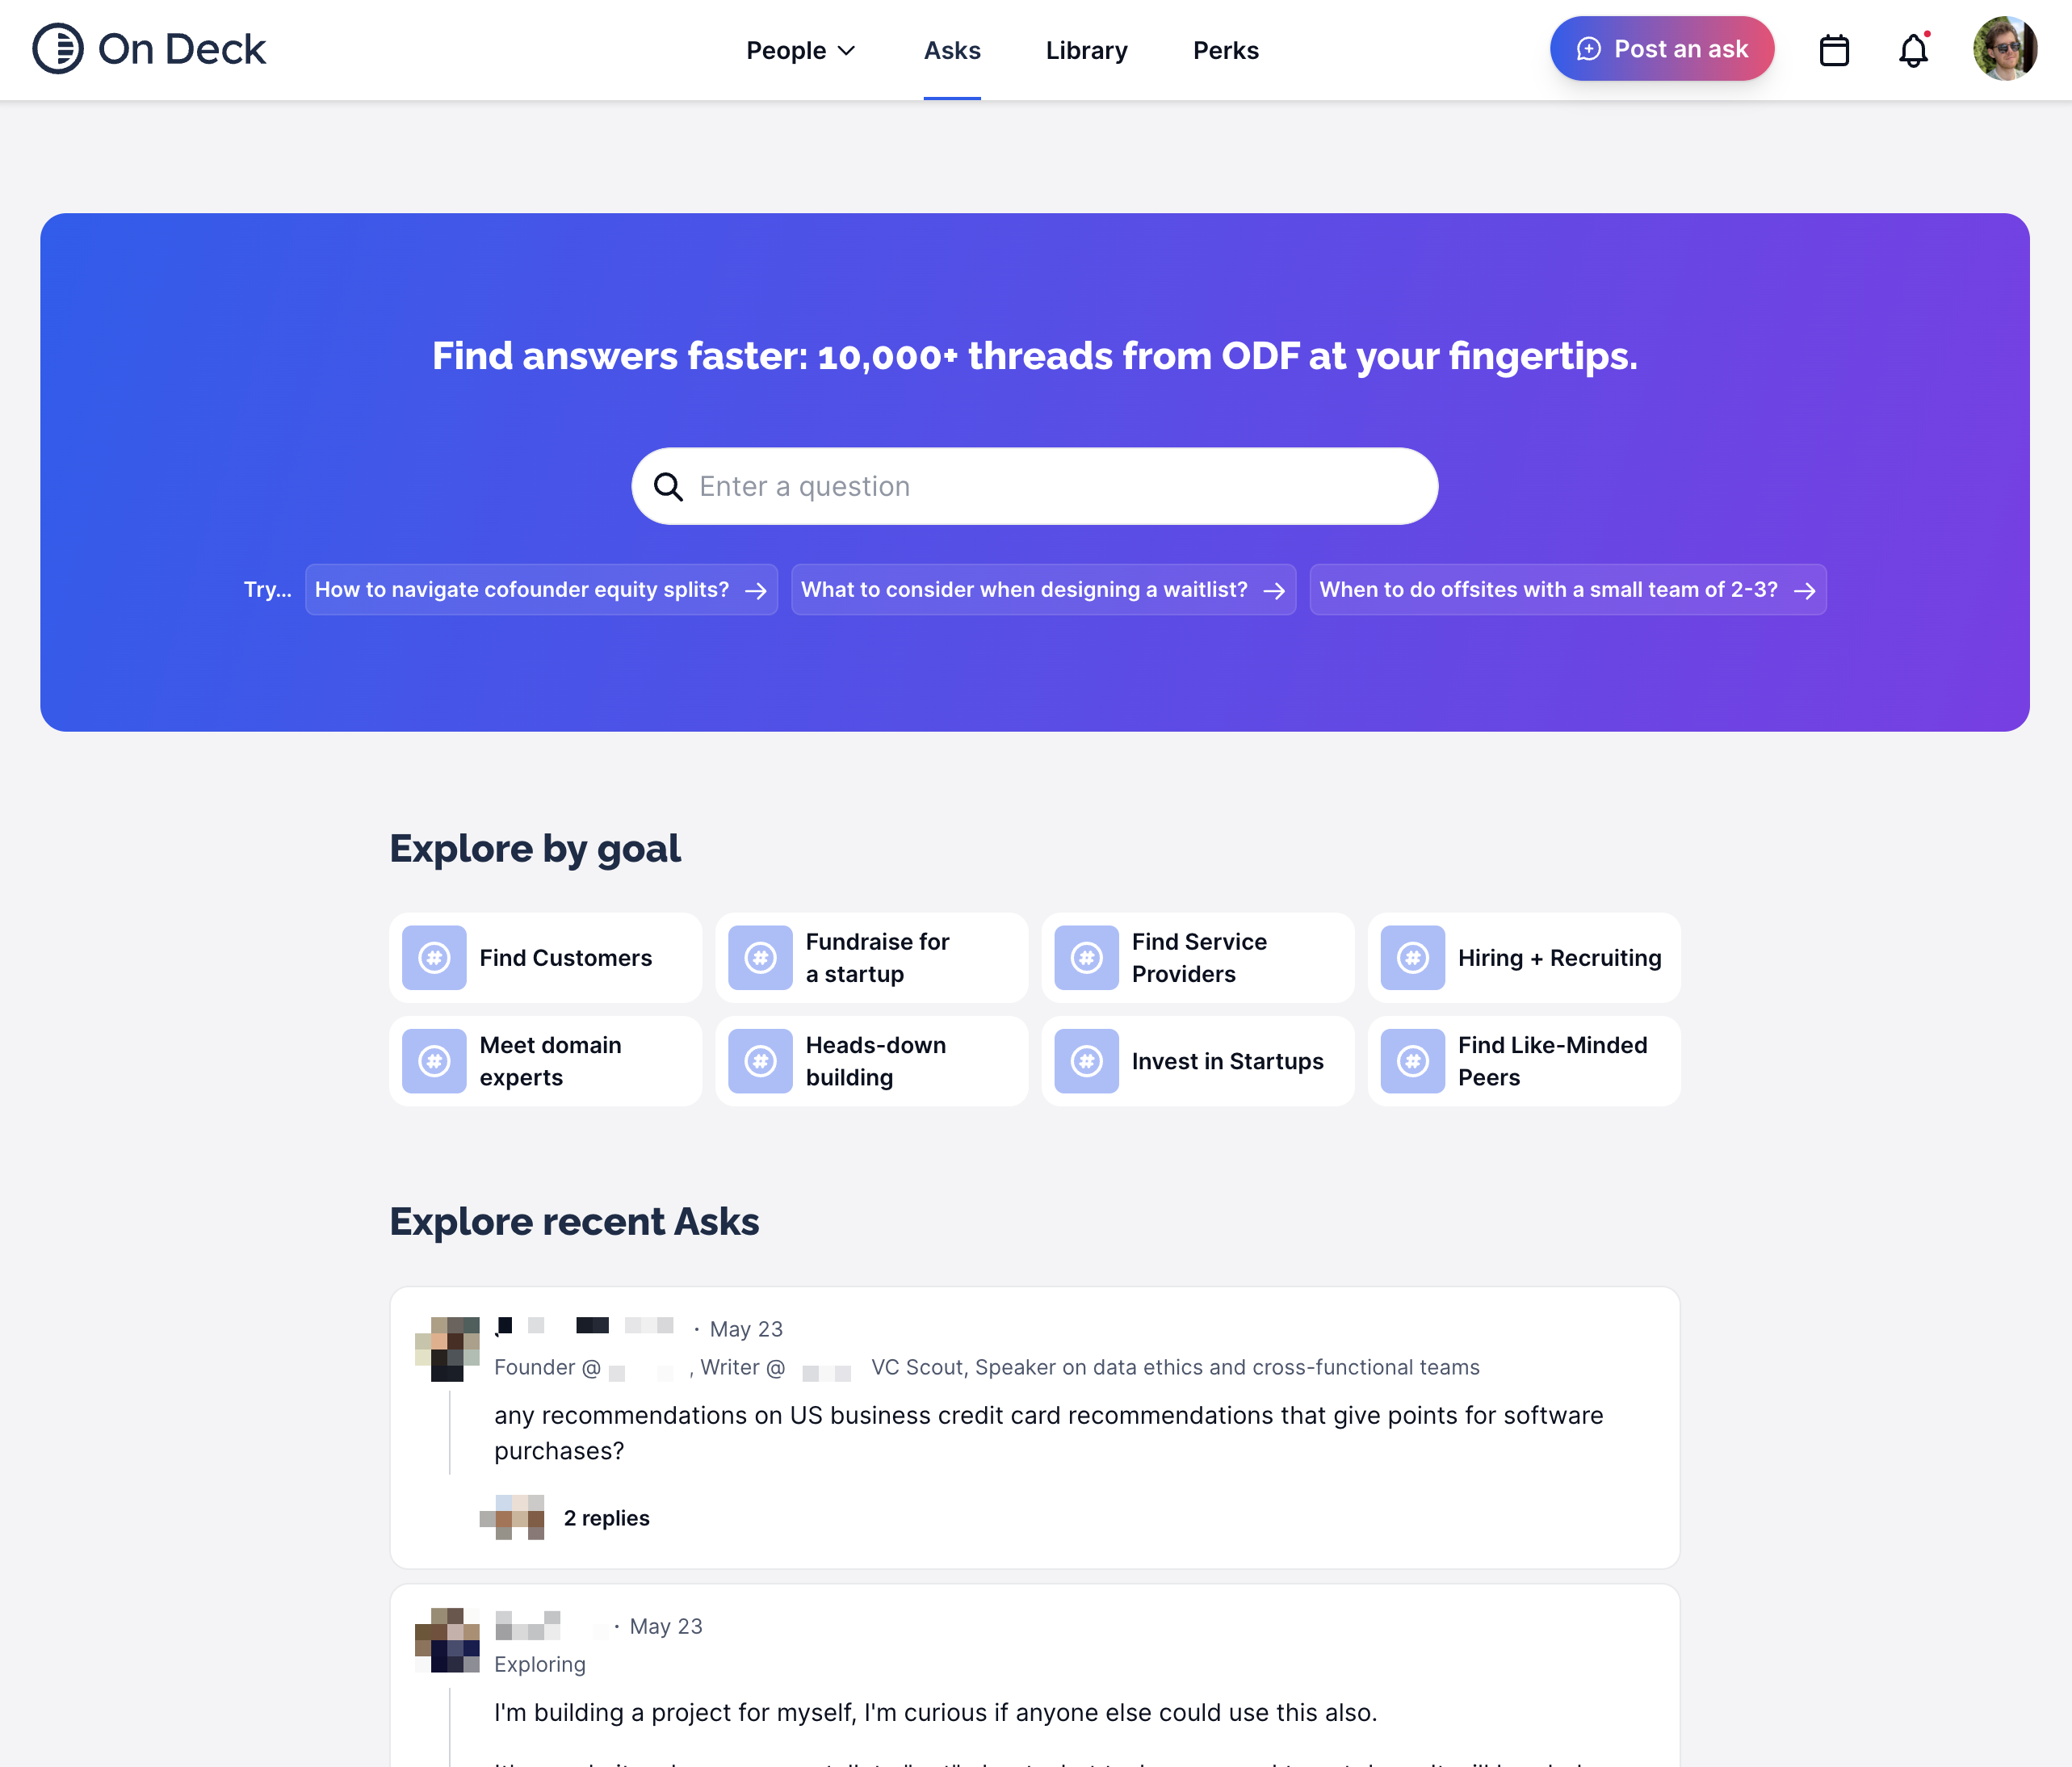 On Deck search functionality